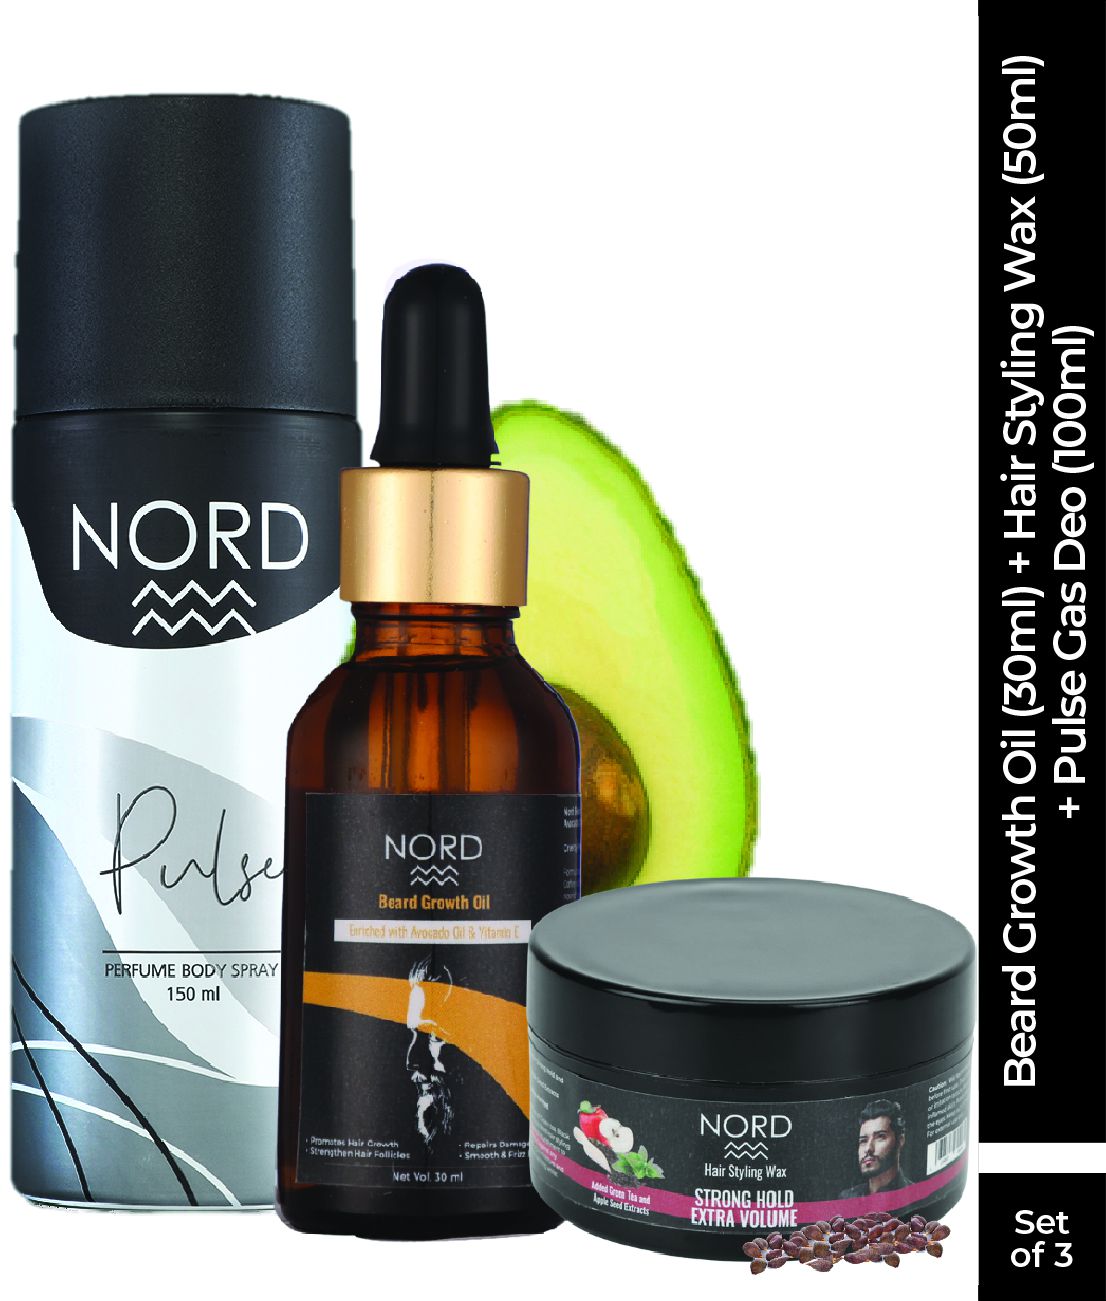 Nord Beard Growth Oil + Hair Styling Wax + Pulse Gas Deo | Pack of 3